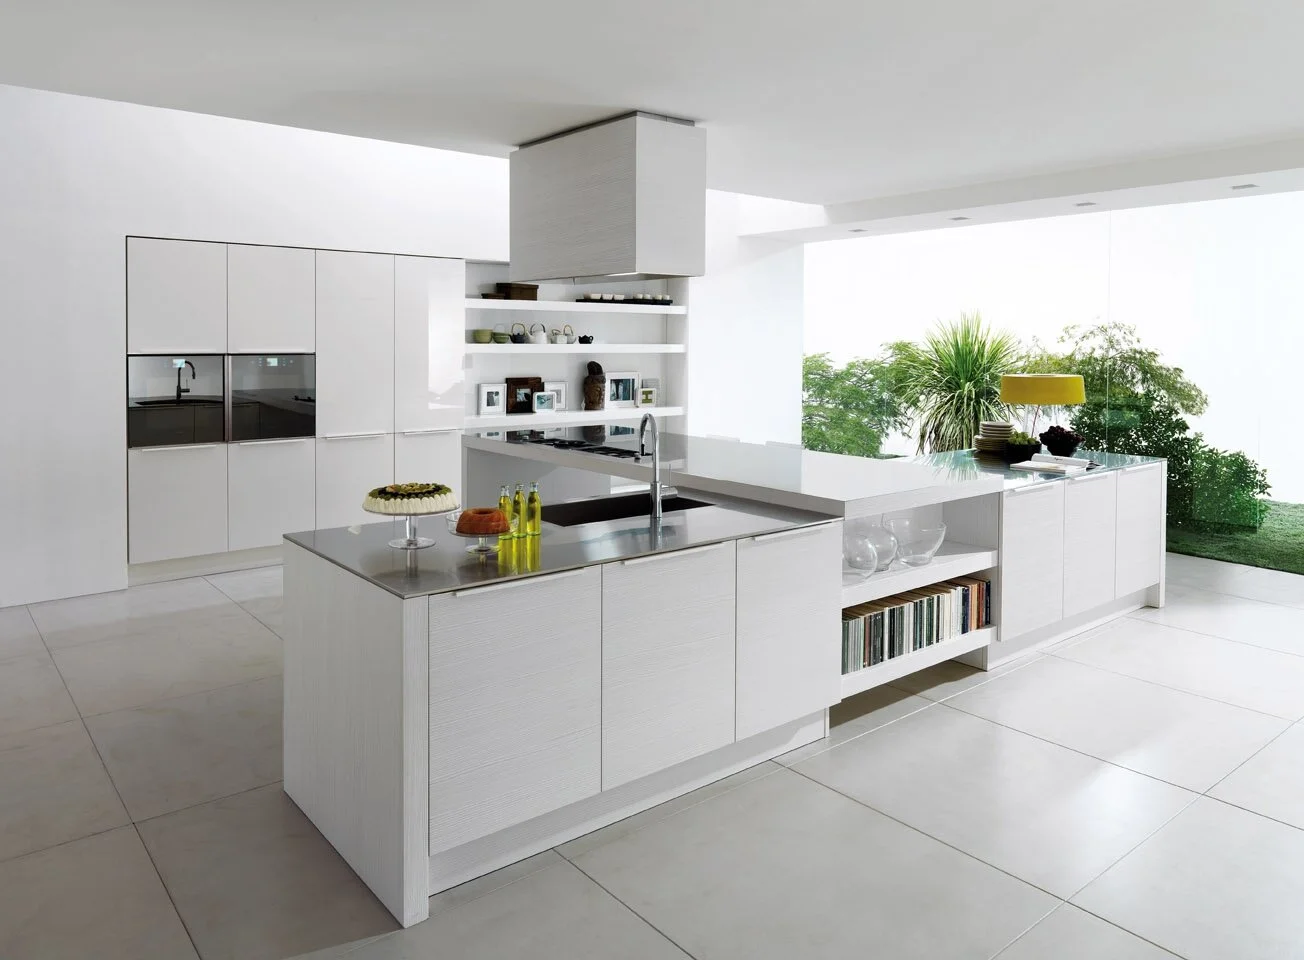 Best Modern Kitchen Design Ideas With White Cabinets Pertaining To Design Your Home In The Form Of Unlimited Kitchen Design Ideas Cabinets